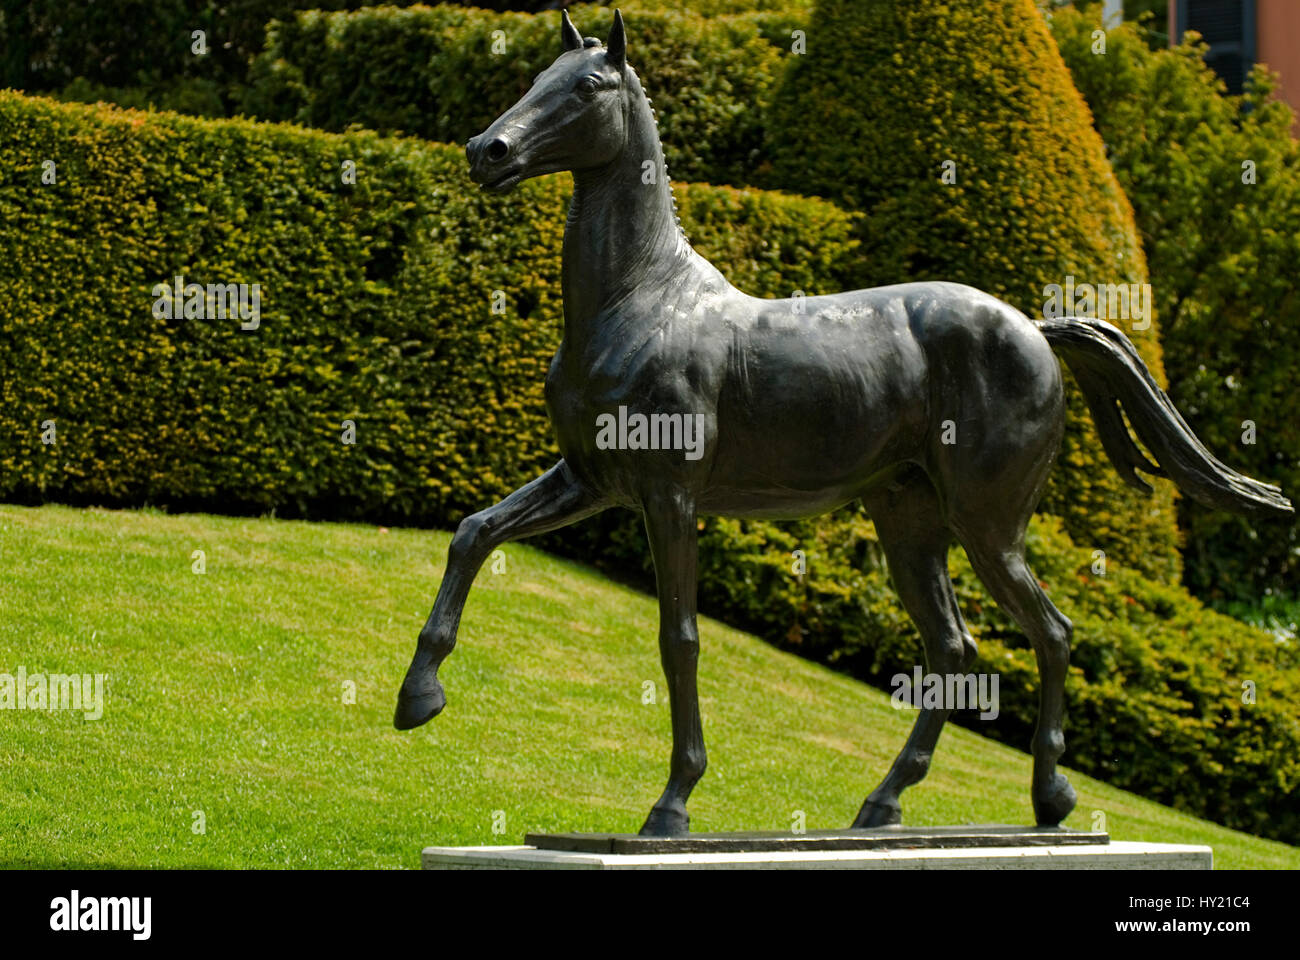 Image of the Horse Sculpture at the La Parc Olympic in  Lausanne, Switzerland. Stock Photo